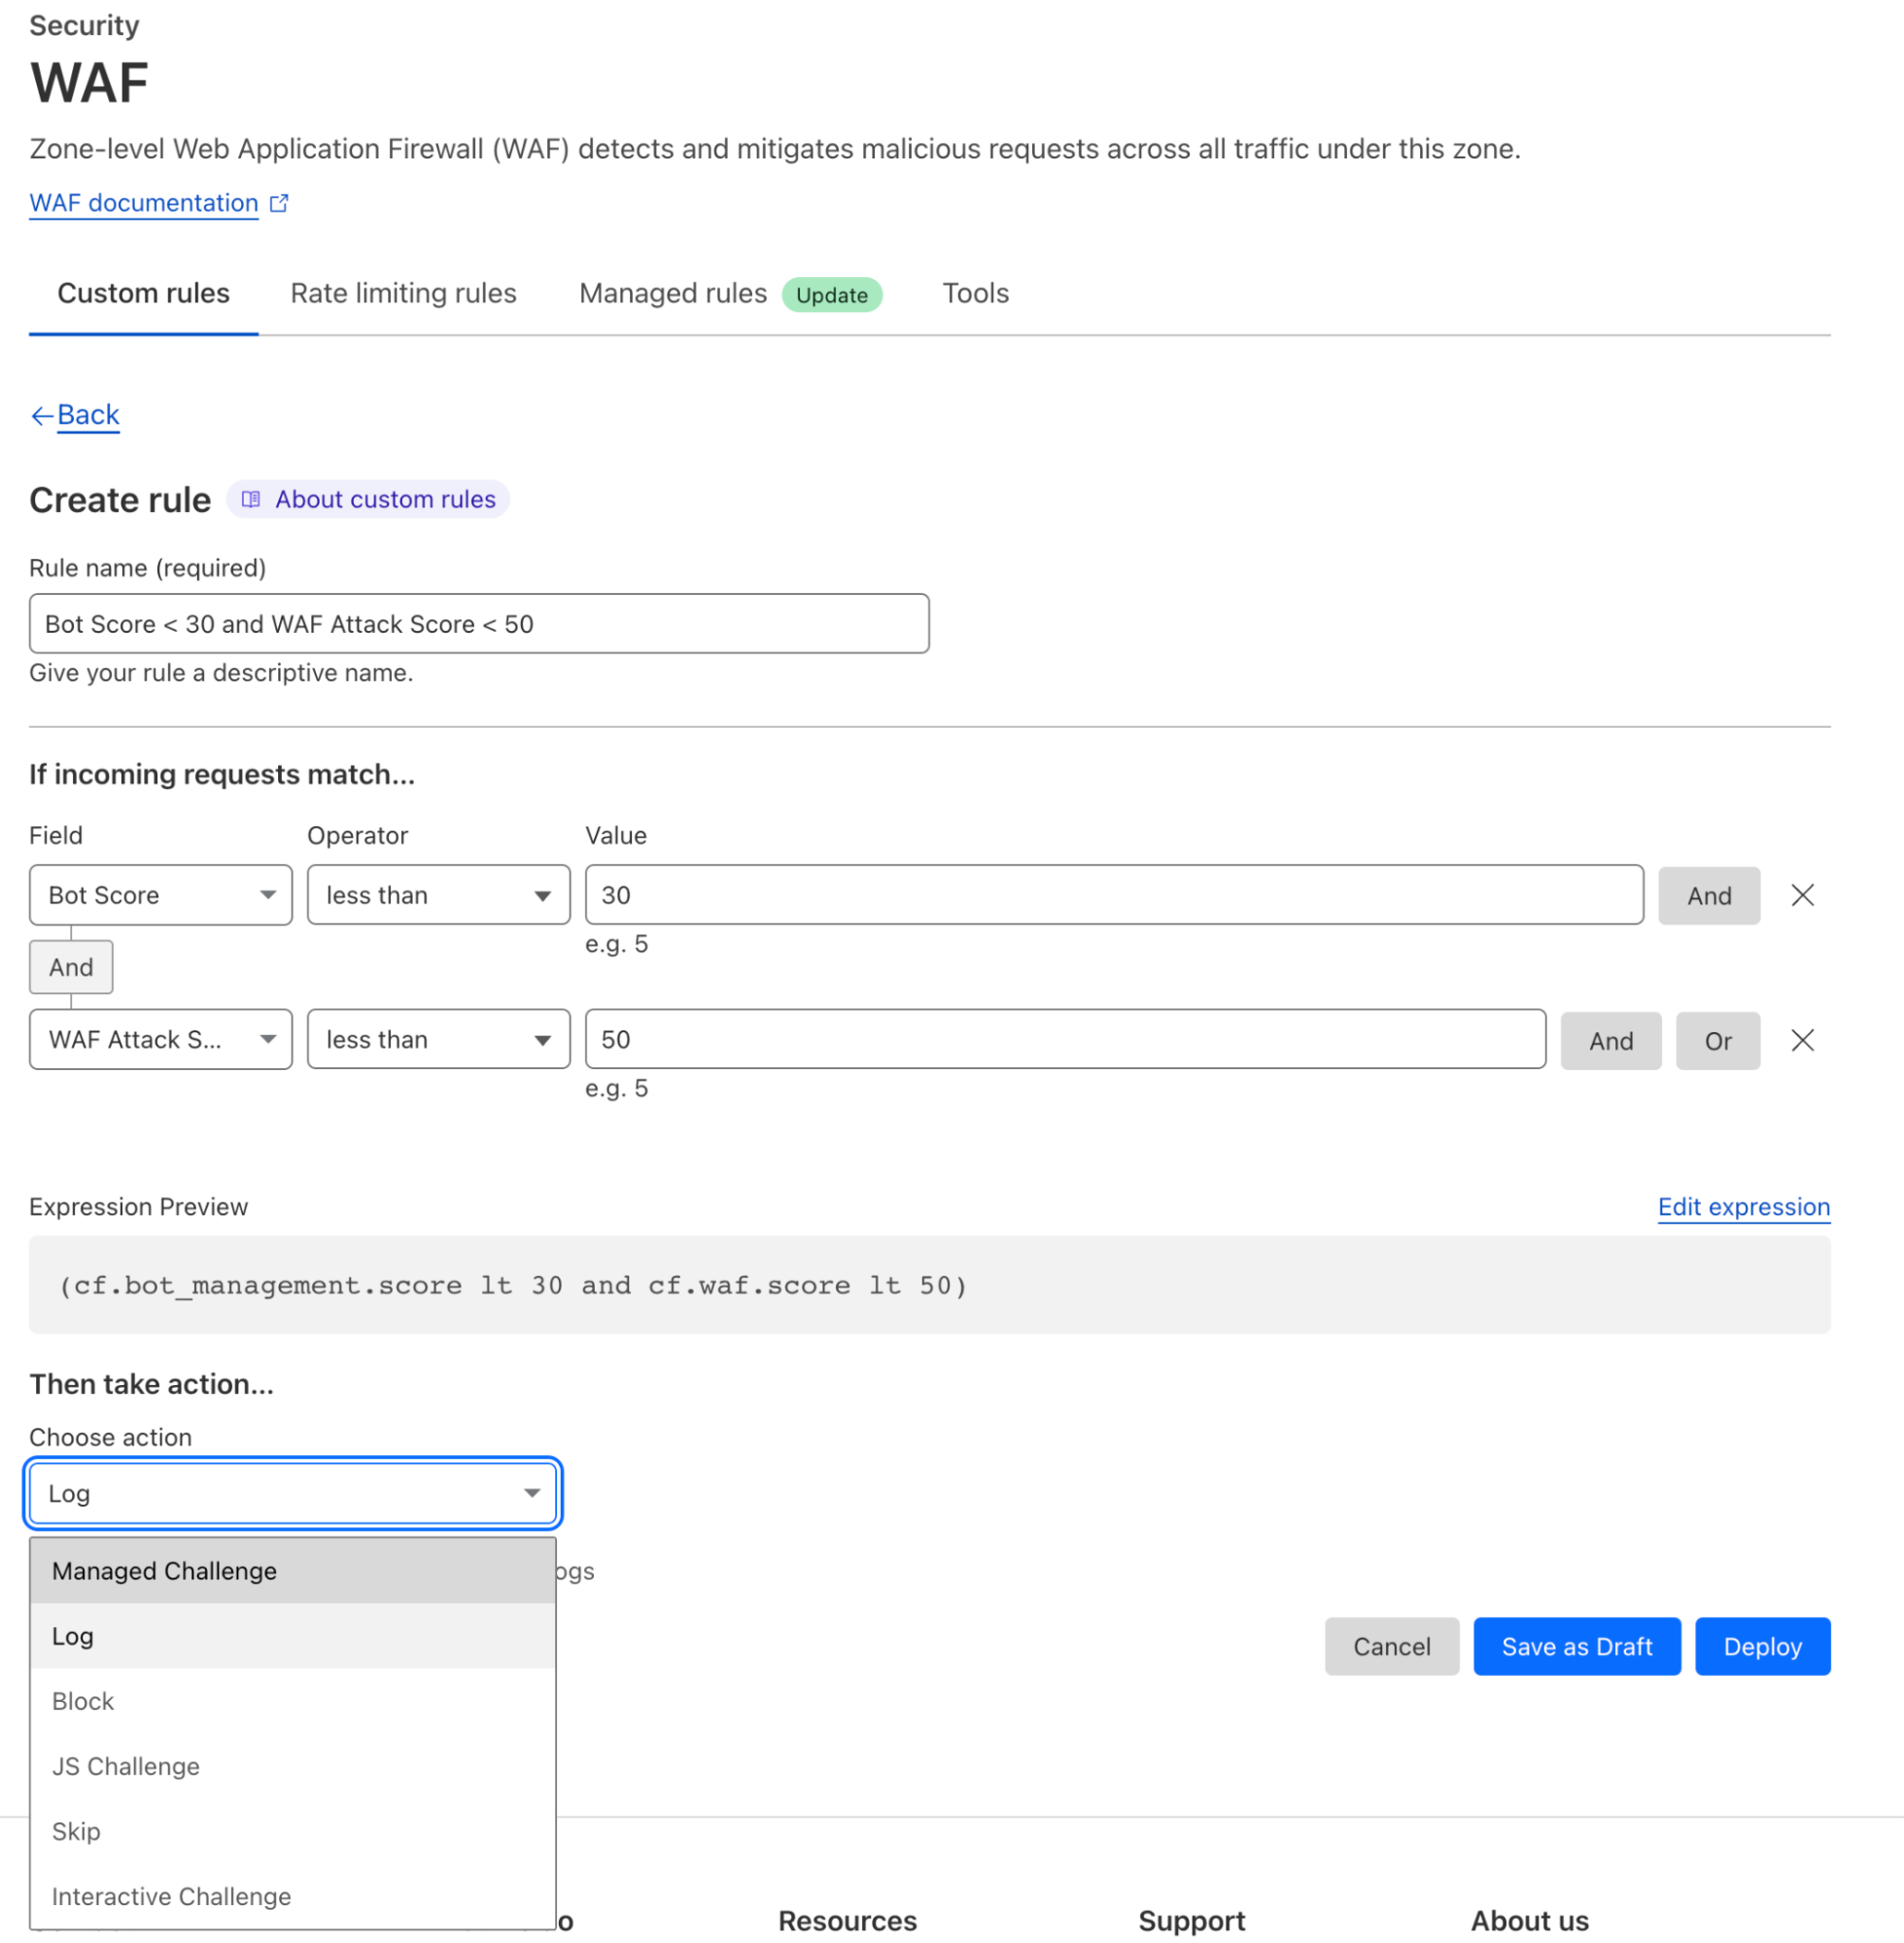 Cloudflare allows for matching on a combination of request attributes and Cloudflare data/fields to determine if specific actions should be taken.